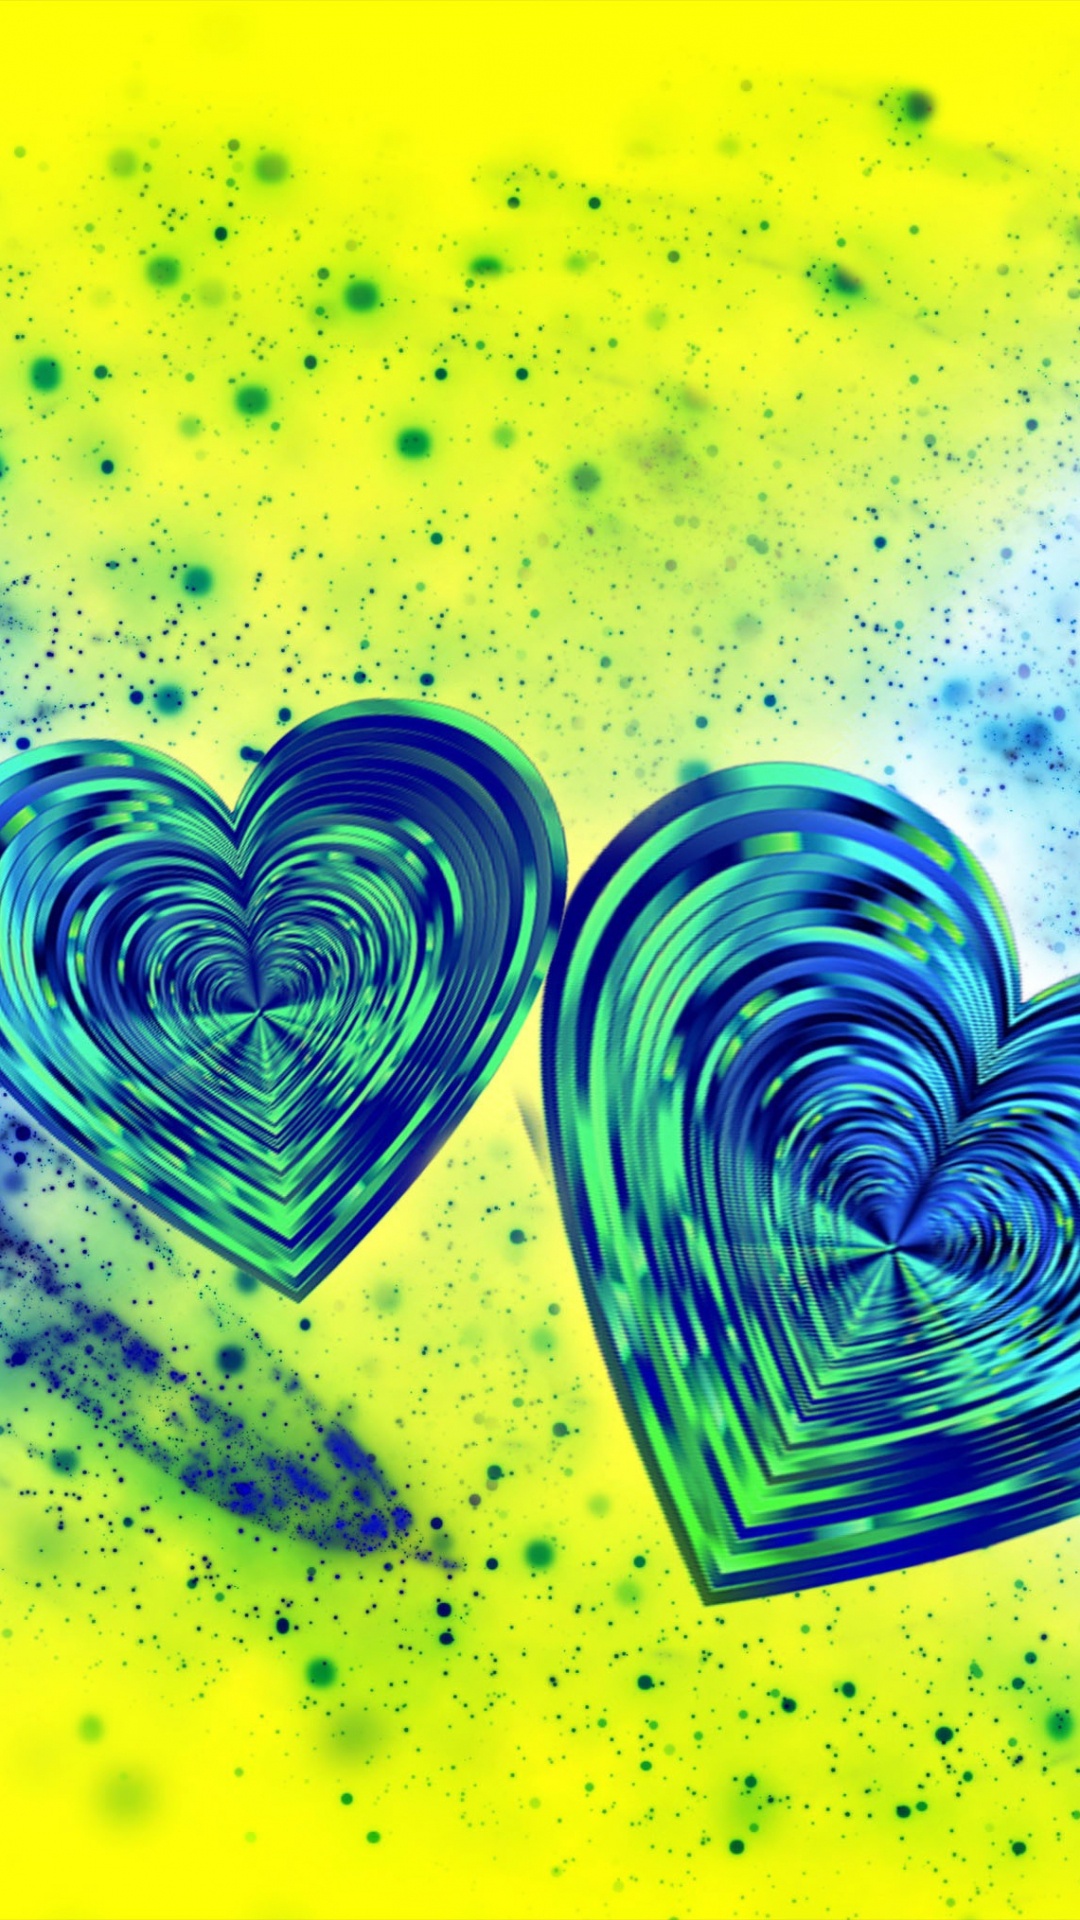 Abstract Art, Heart, Love, Graphic Design, Graphics. Wallpaper in 1080x1920 Resolution